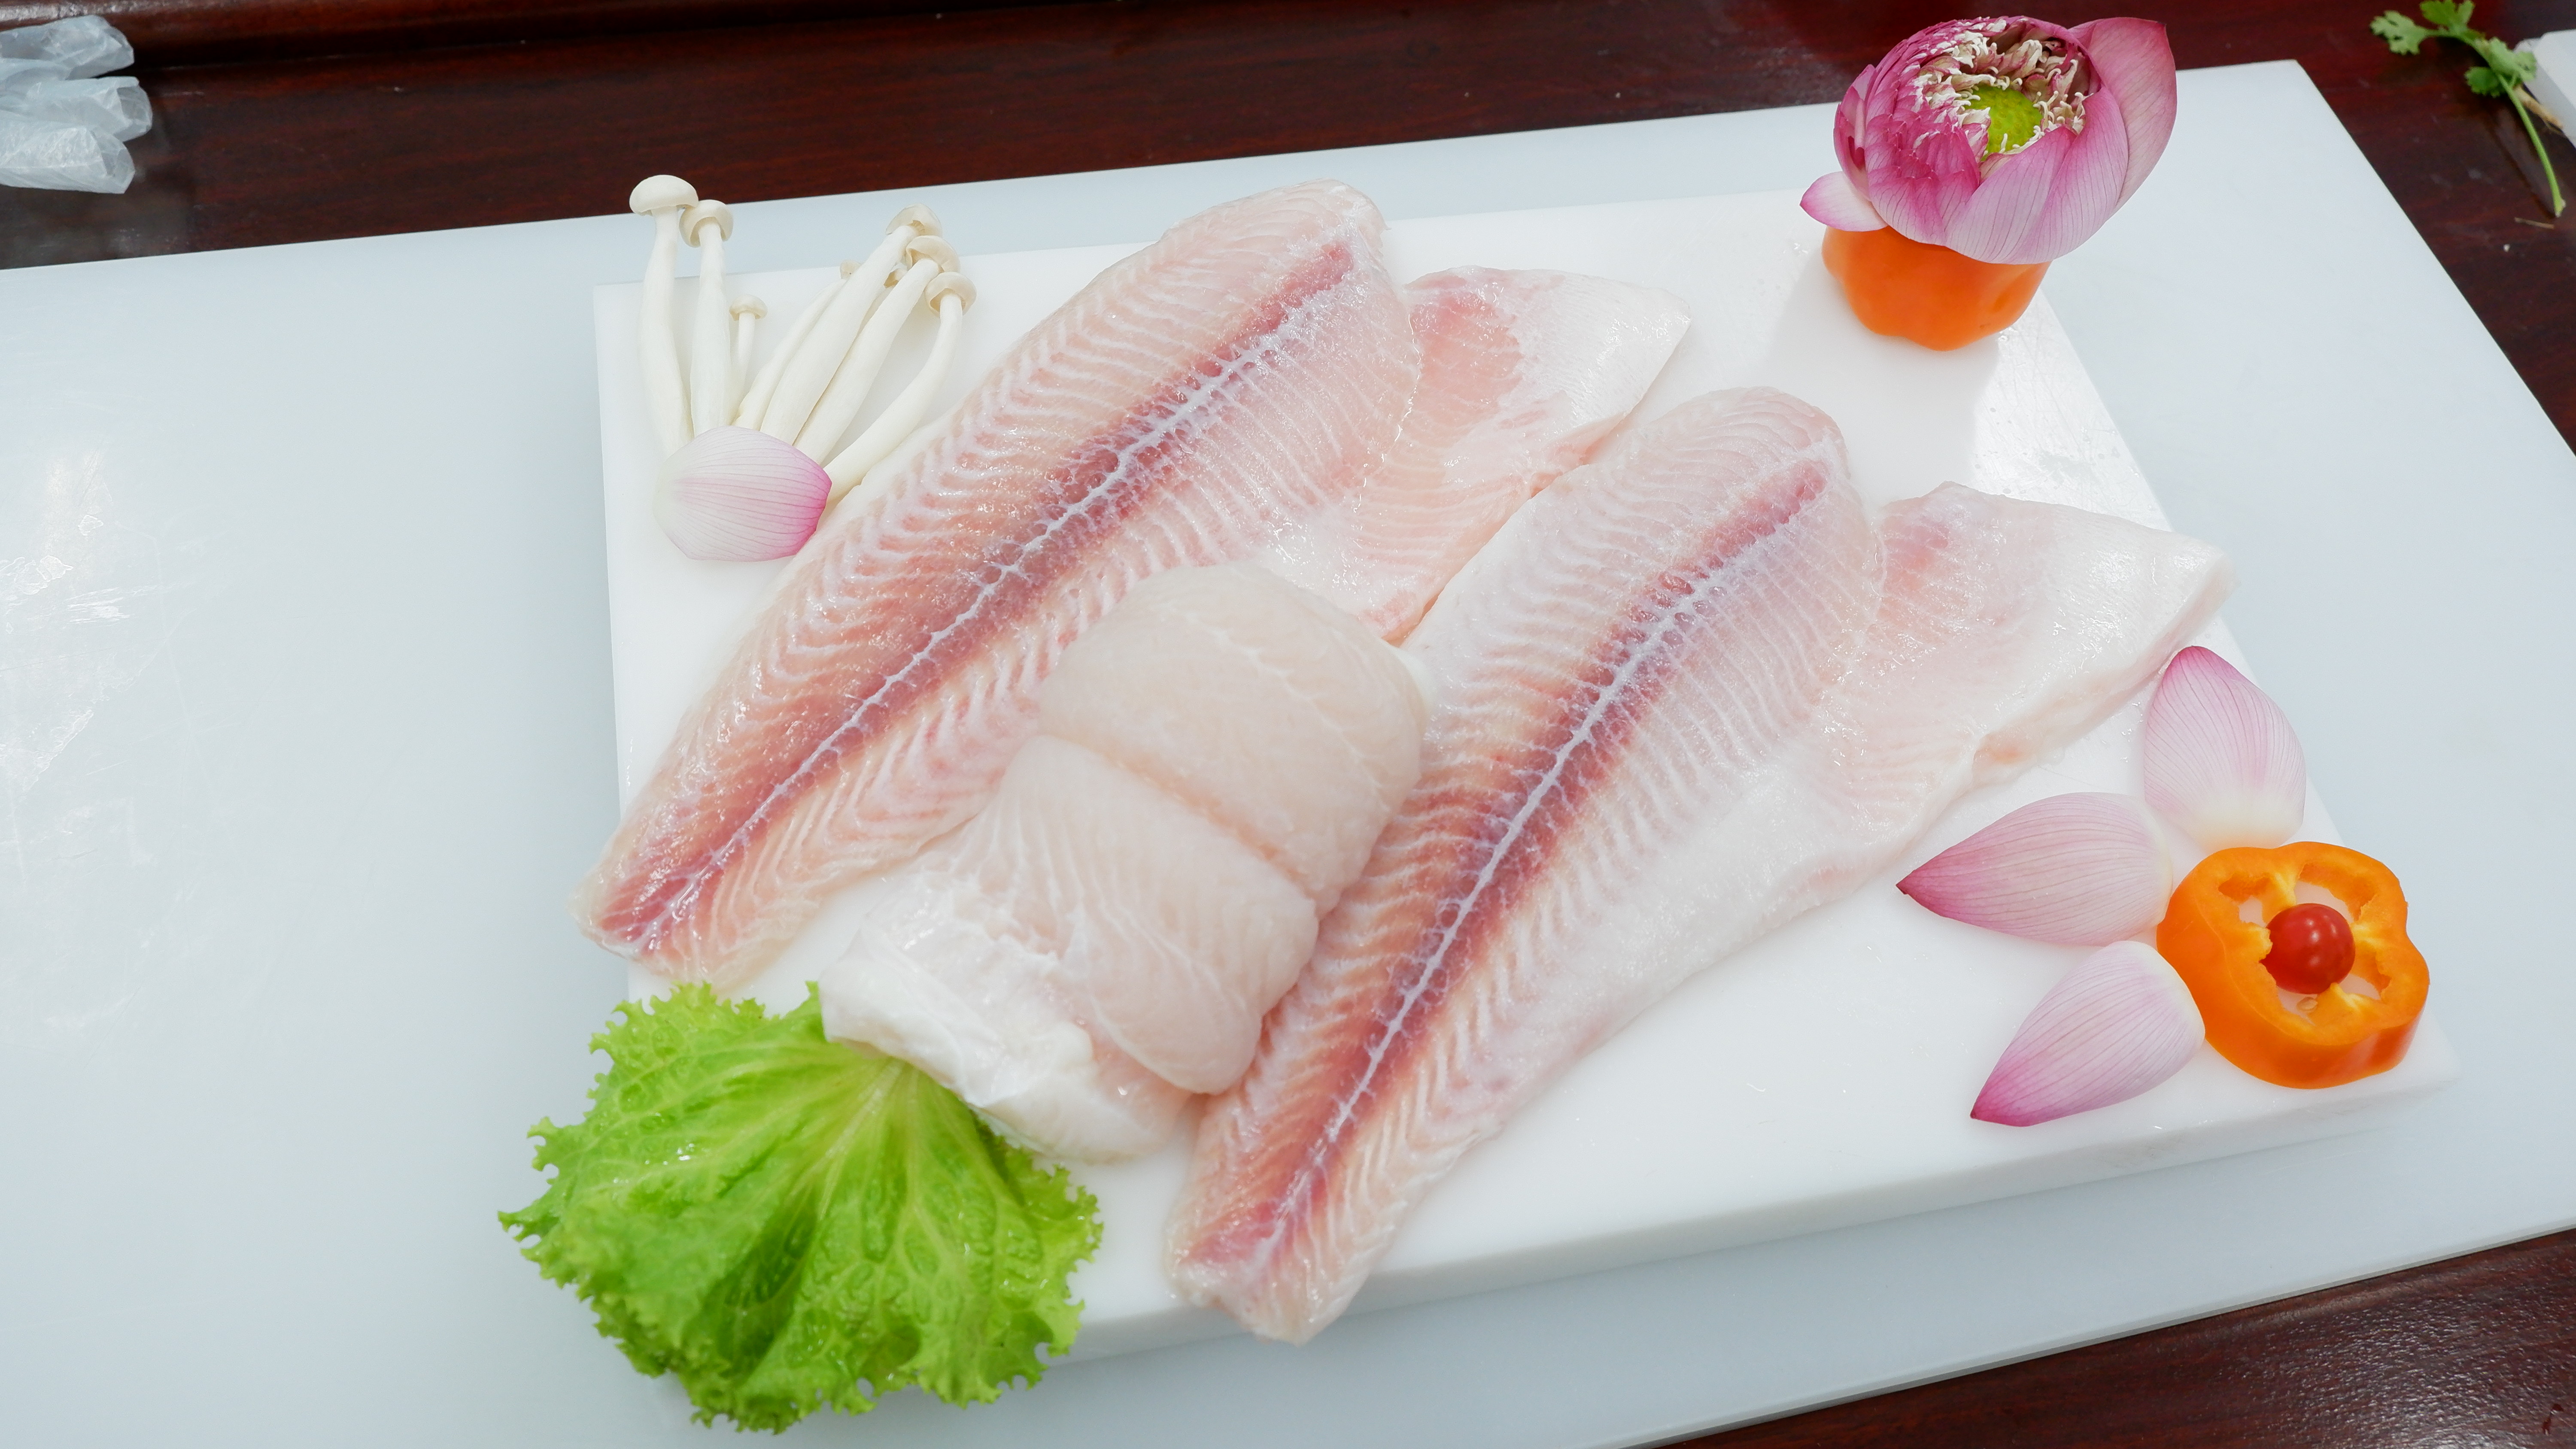 <span  class="uc_style_uc_tiles_grid_image_elementor_uc_items_attribute_title" style="color:#ffffff;">Pangasius Fillet Untrimmed</span>